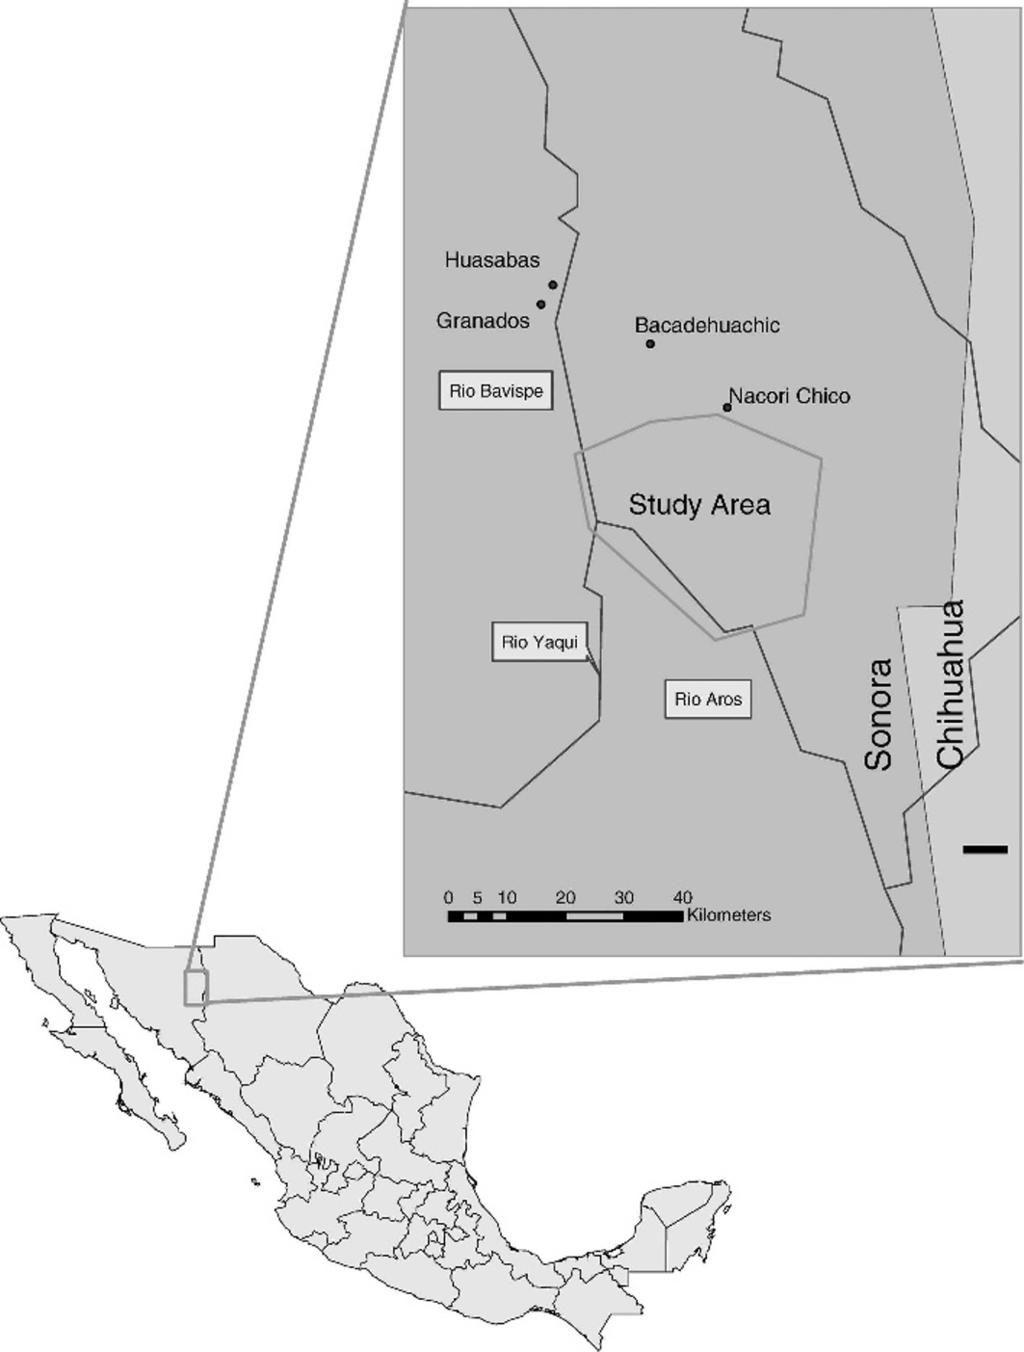 endangered and protected in Mexico (Secretary of Natural Resources of Mexico [SEMARNAT] 2002), and the northernmost population of jaguars in the Americas inhabits the Sierra Madre Occidental in